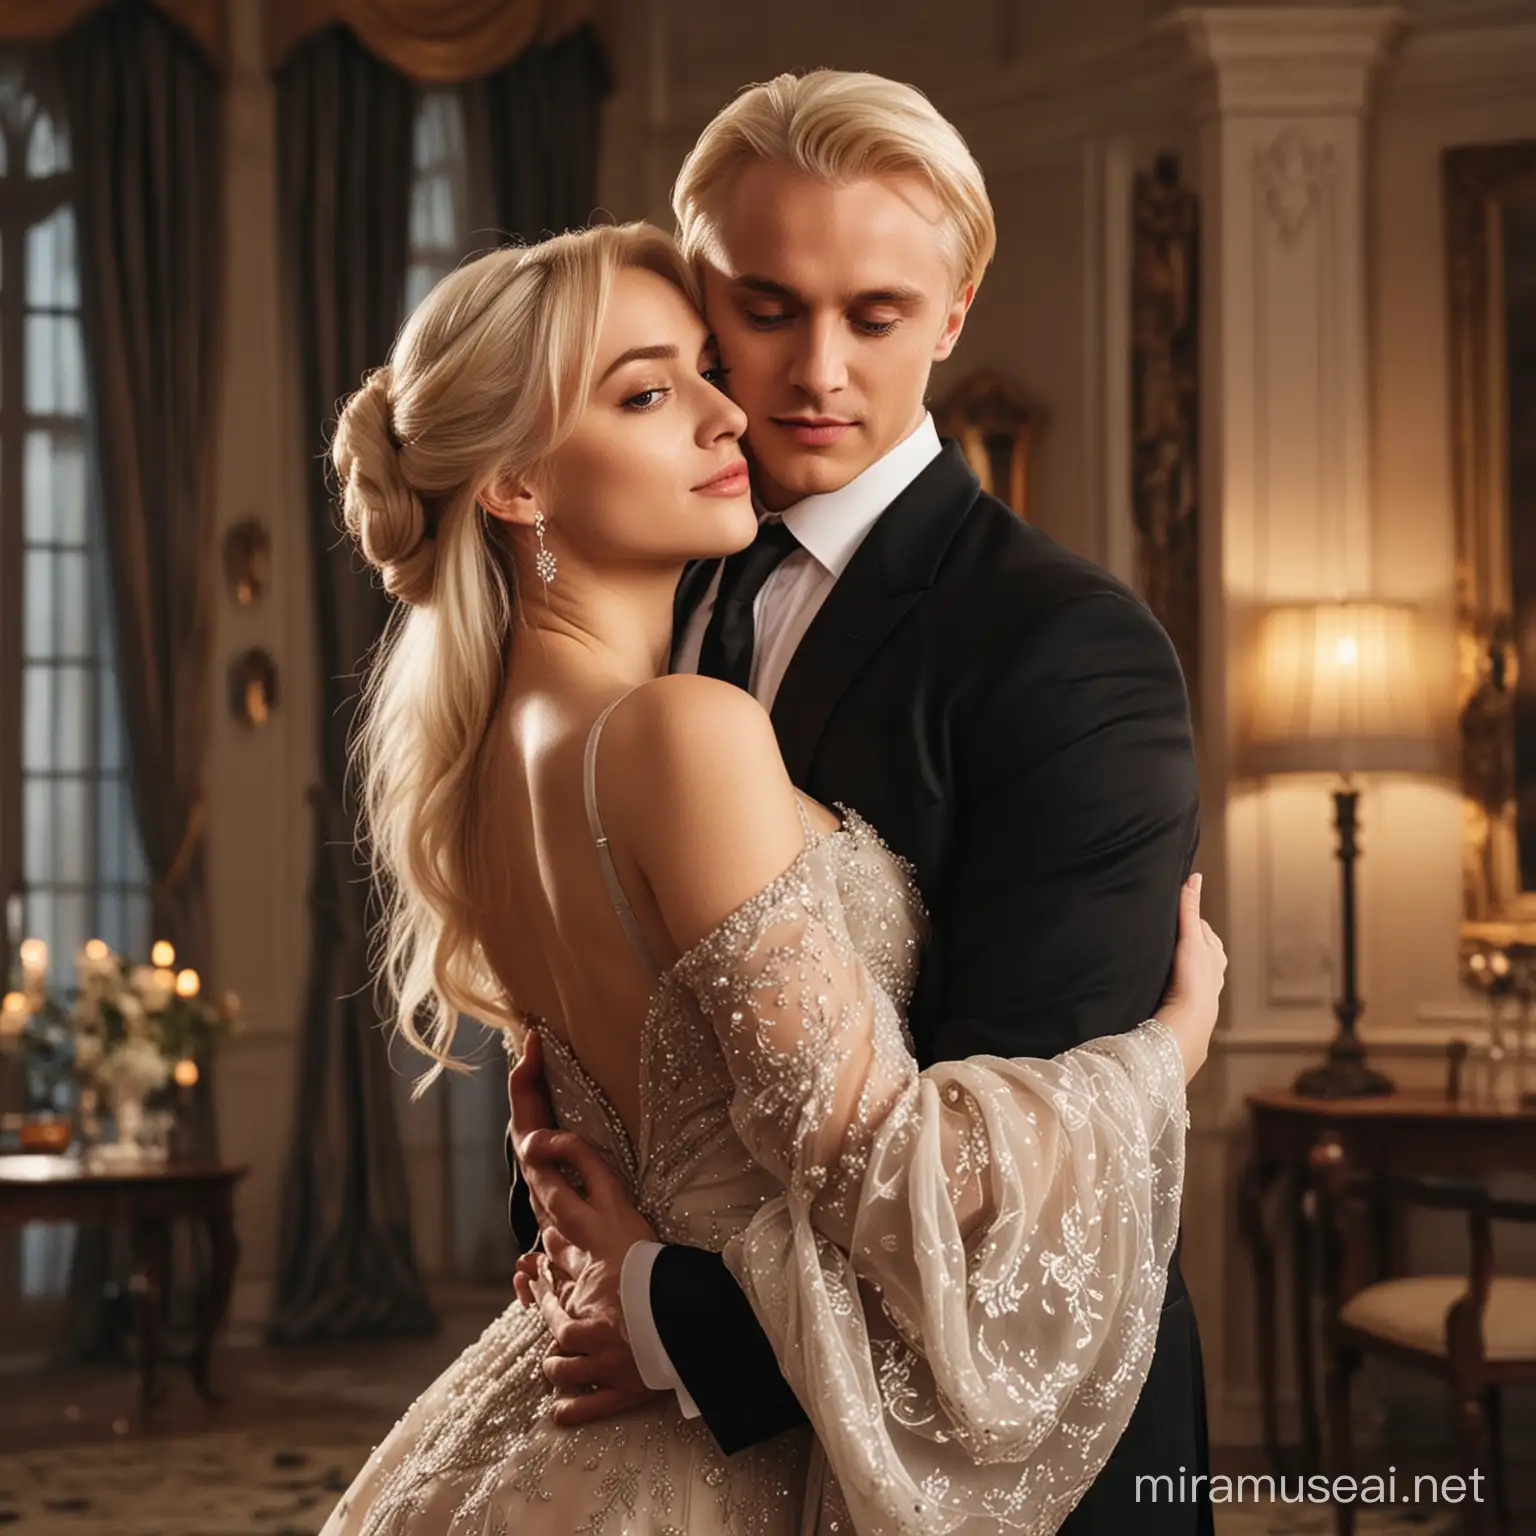 Handsome Draco Malfoy in a suit and hugs a beautiful blonde girl in a beautiful evening dress, dear Dom,